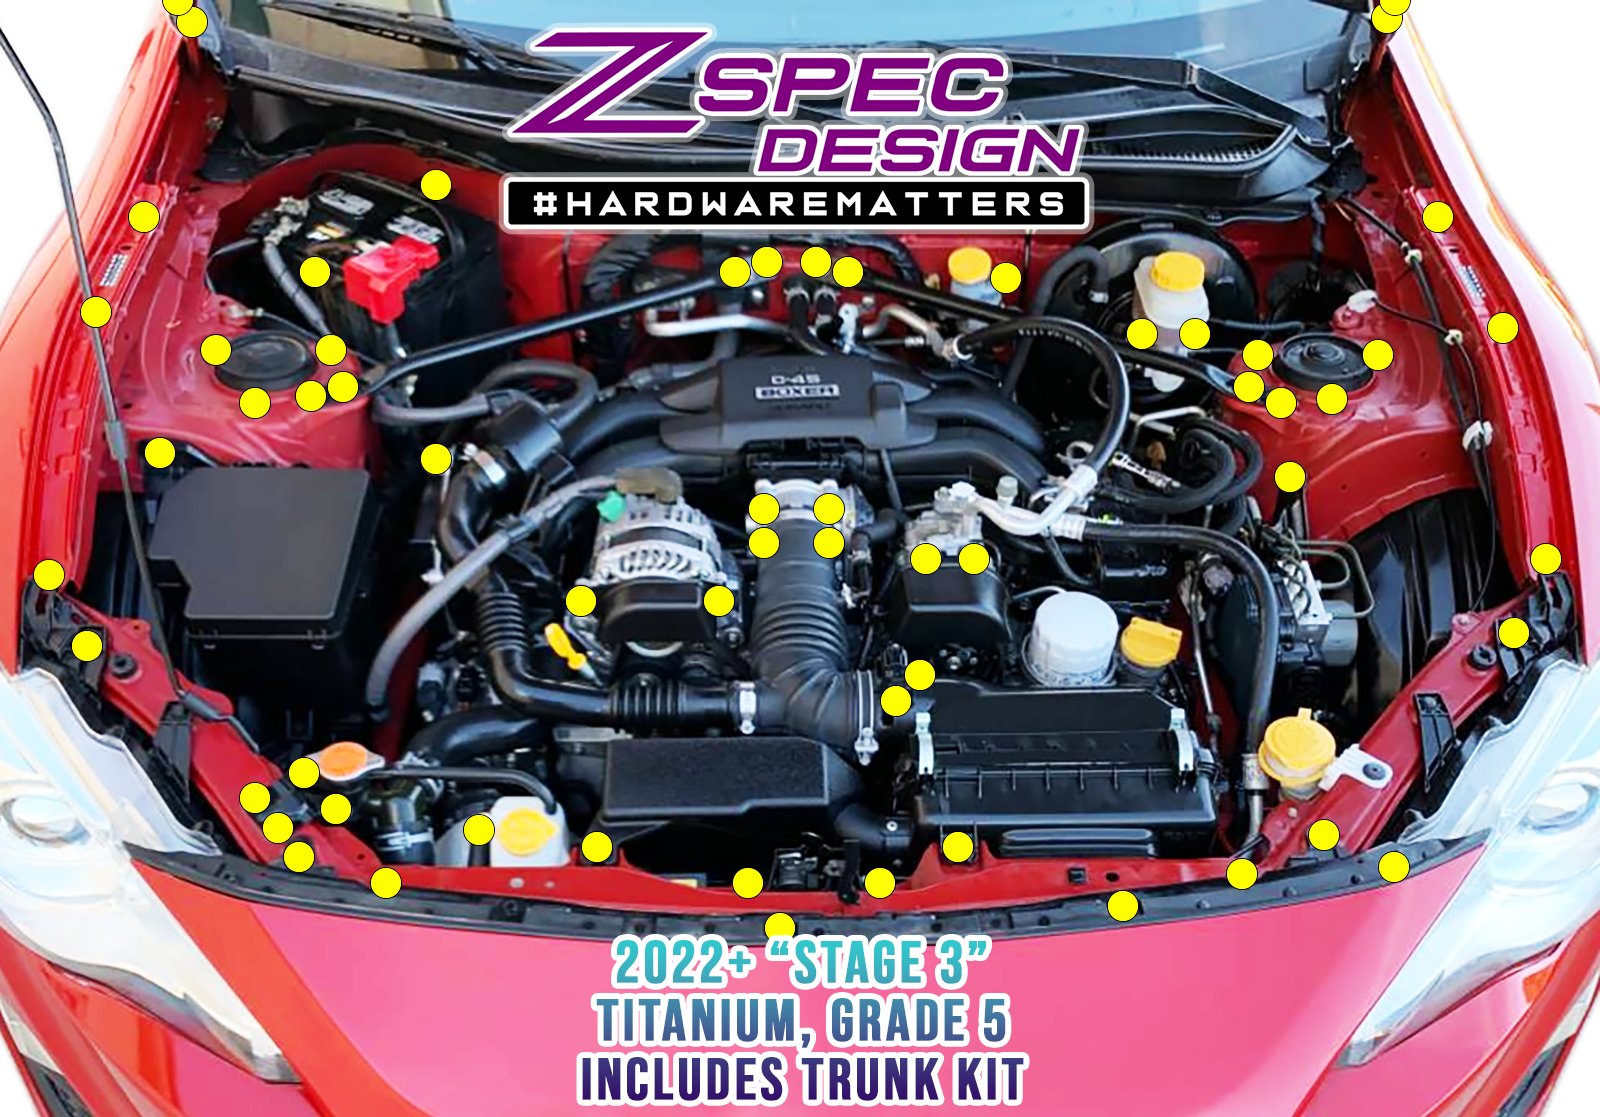 ZSPEC Dress Up Bolts® Hardware Kits and Accessories for the Subaru BRZ.  Titanium, Billet and Stainless Car Show Upgrades